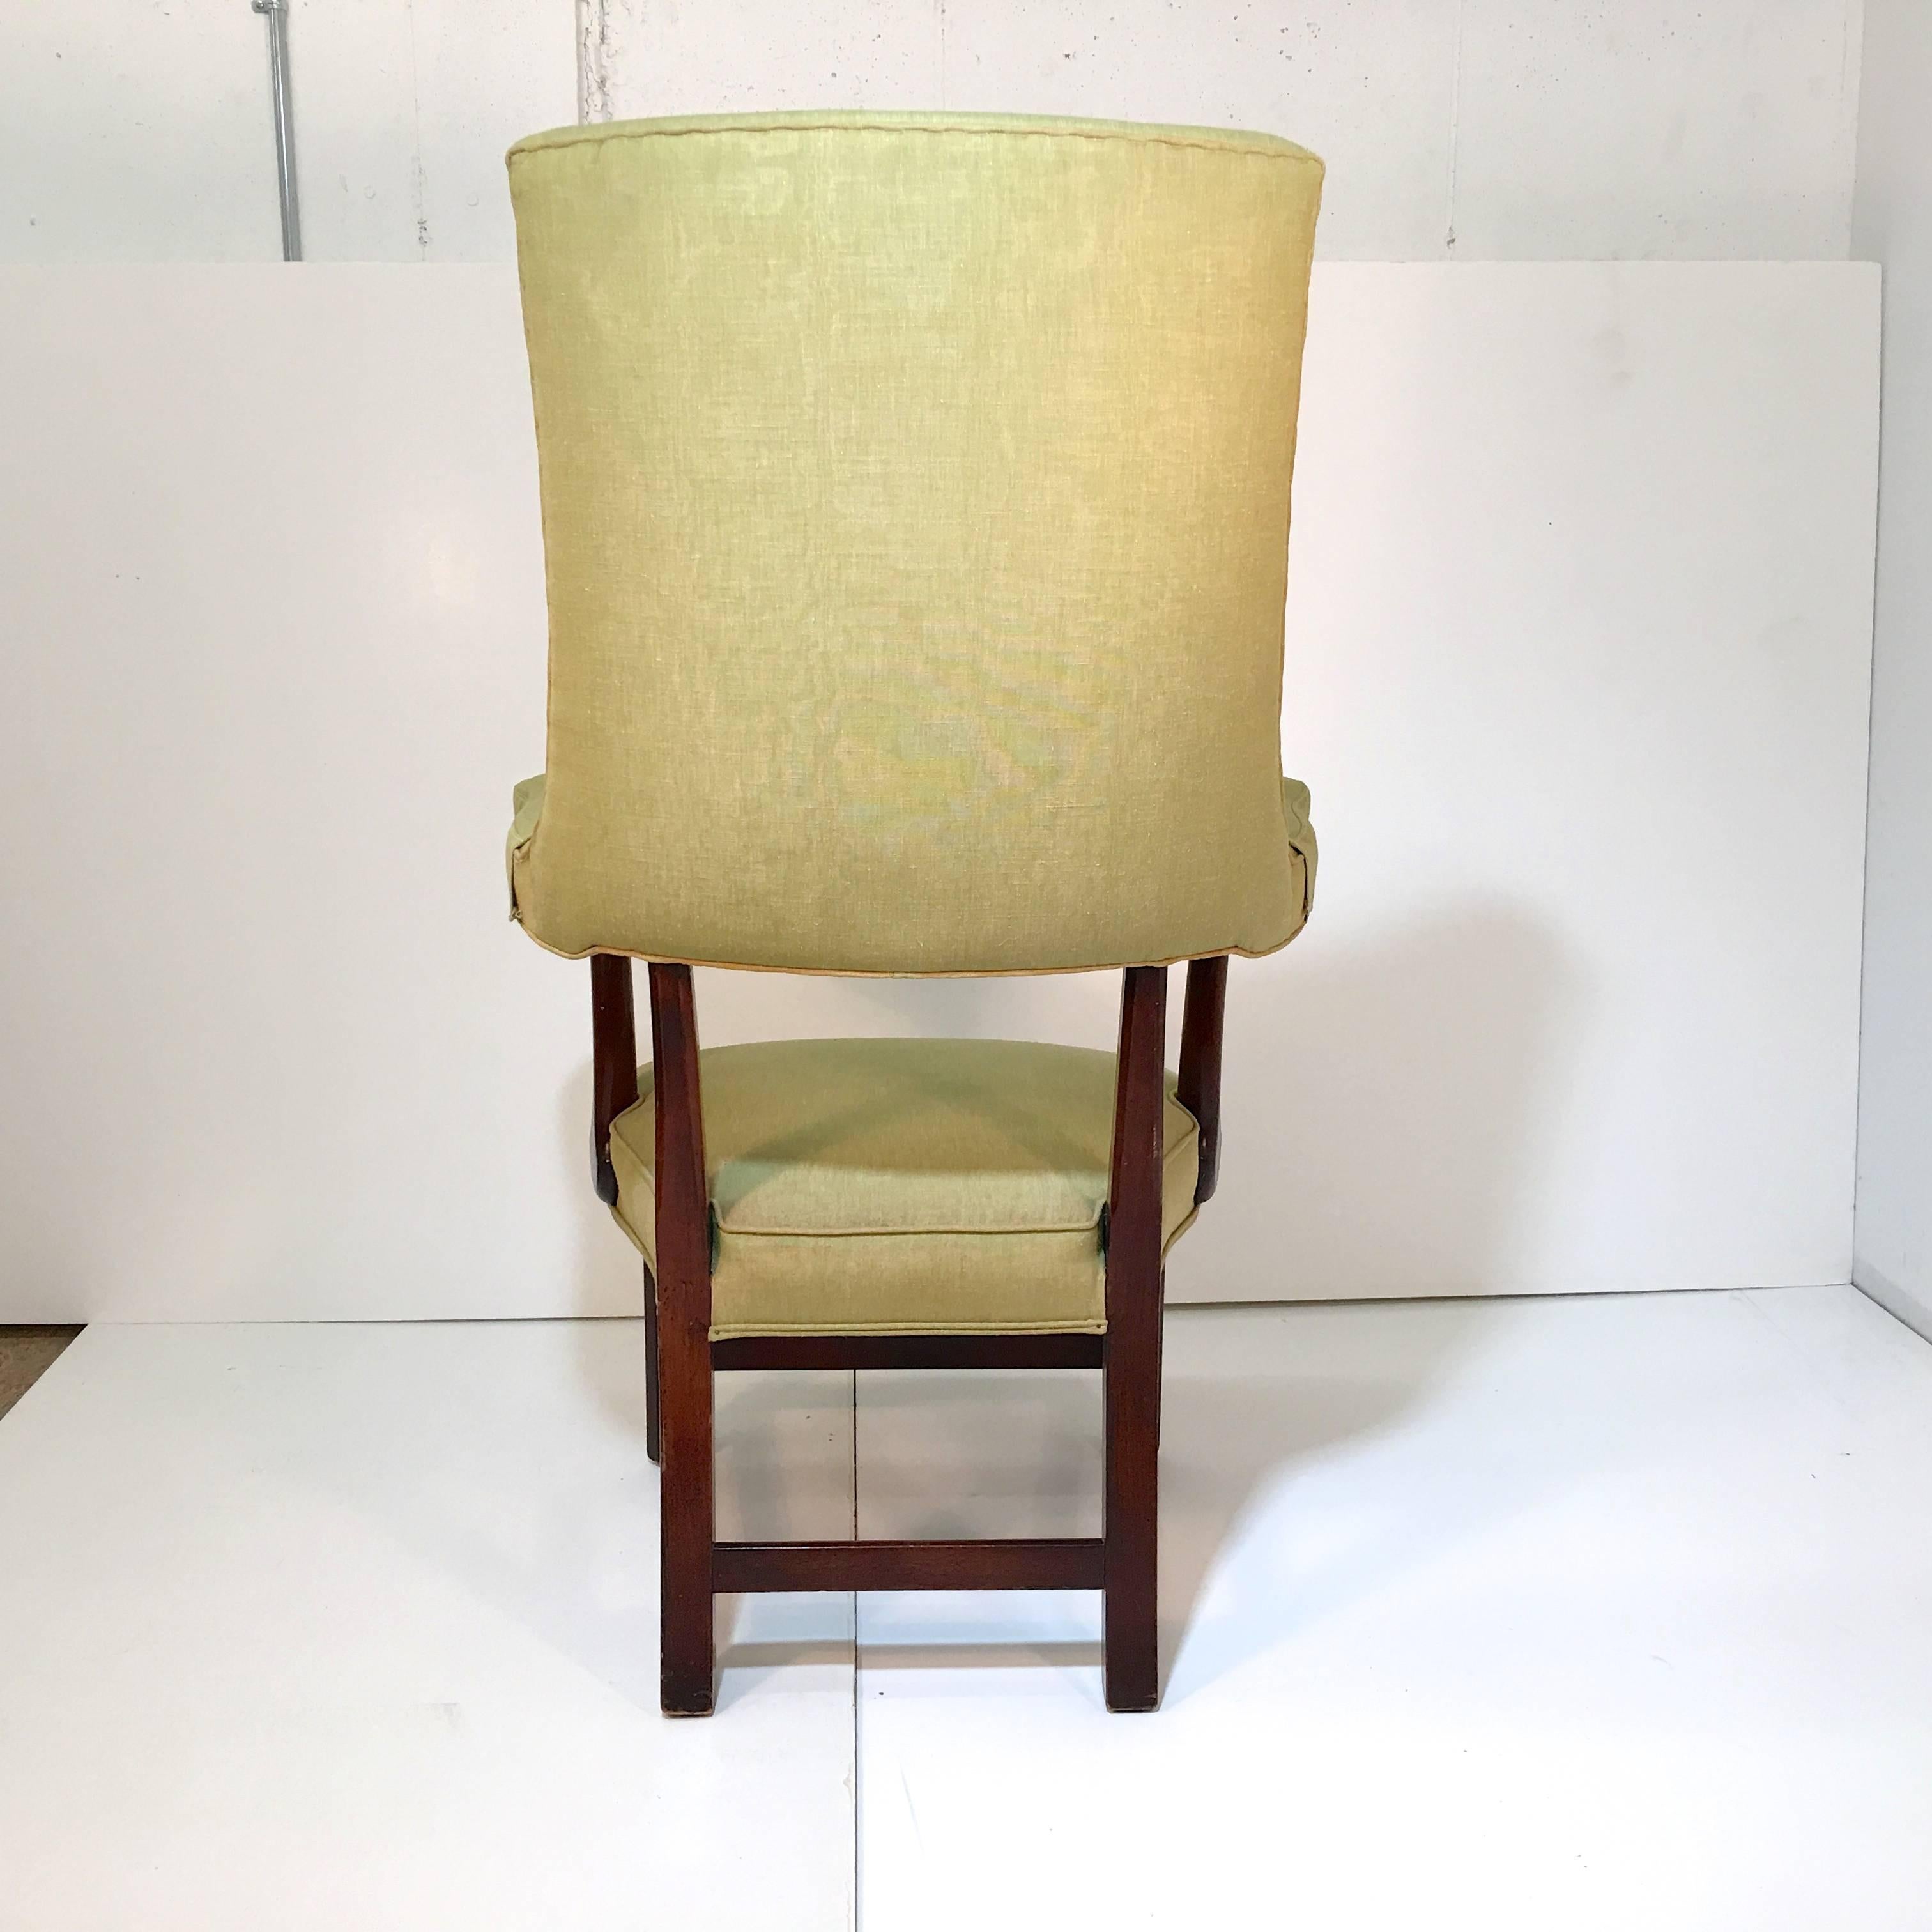 American Tall Curved Back Upholstered Mahogany Arm Chair